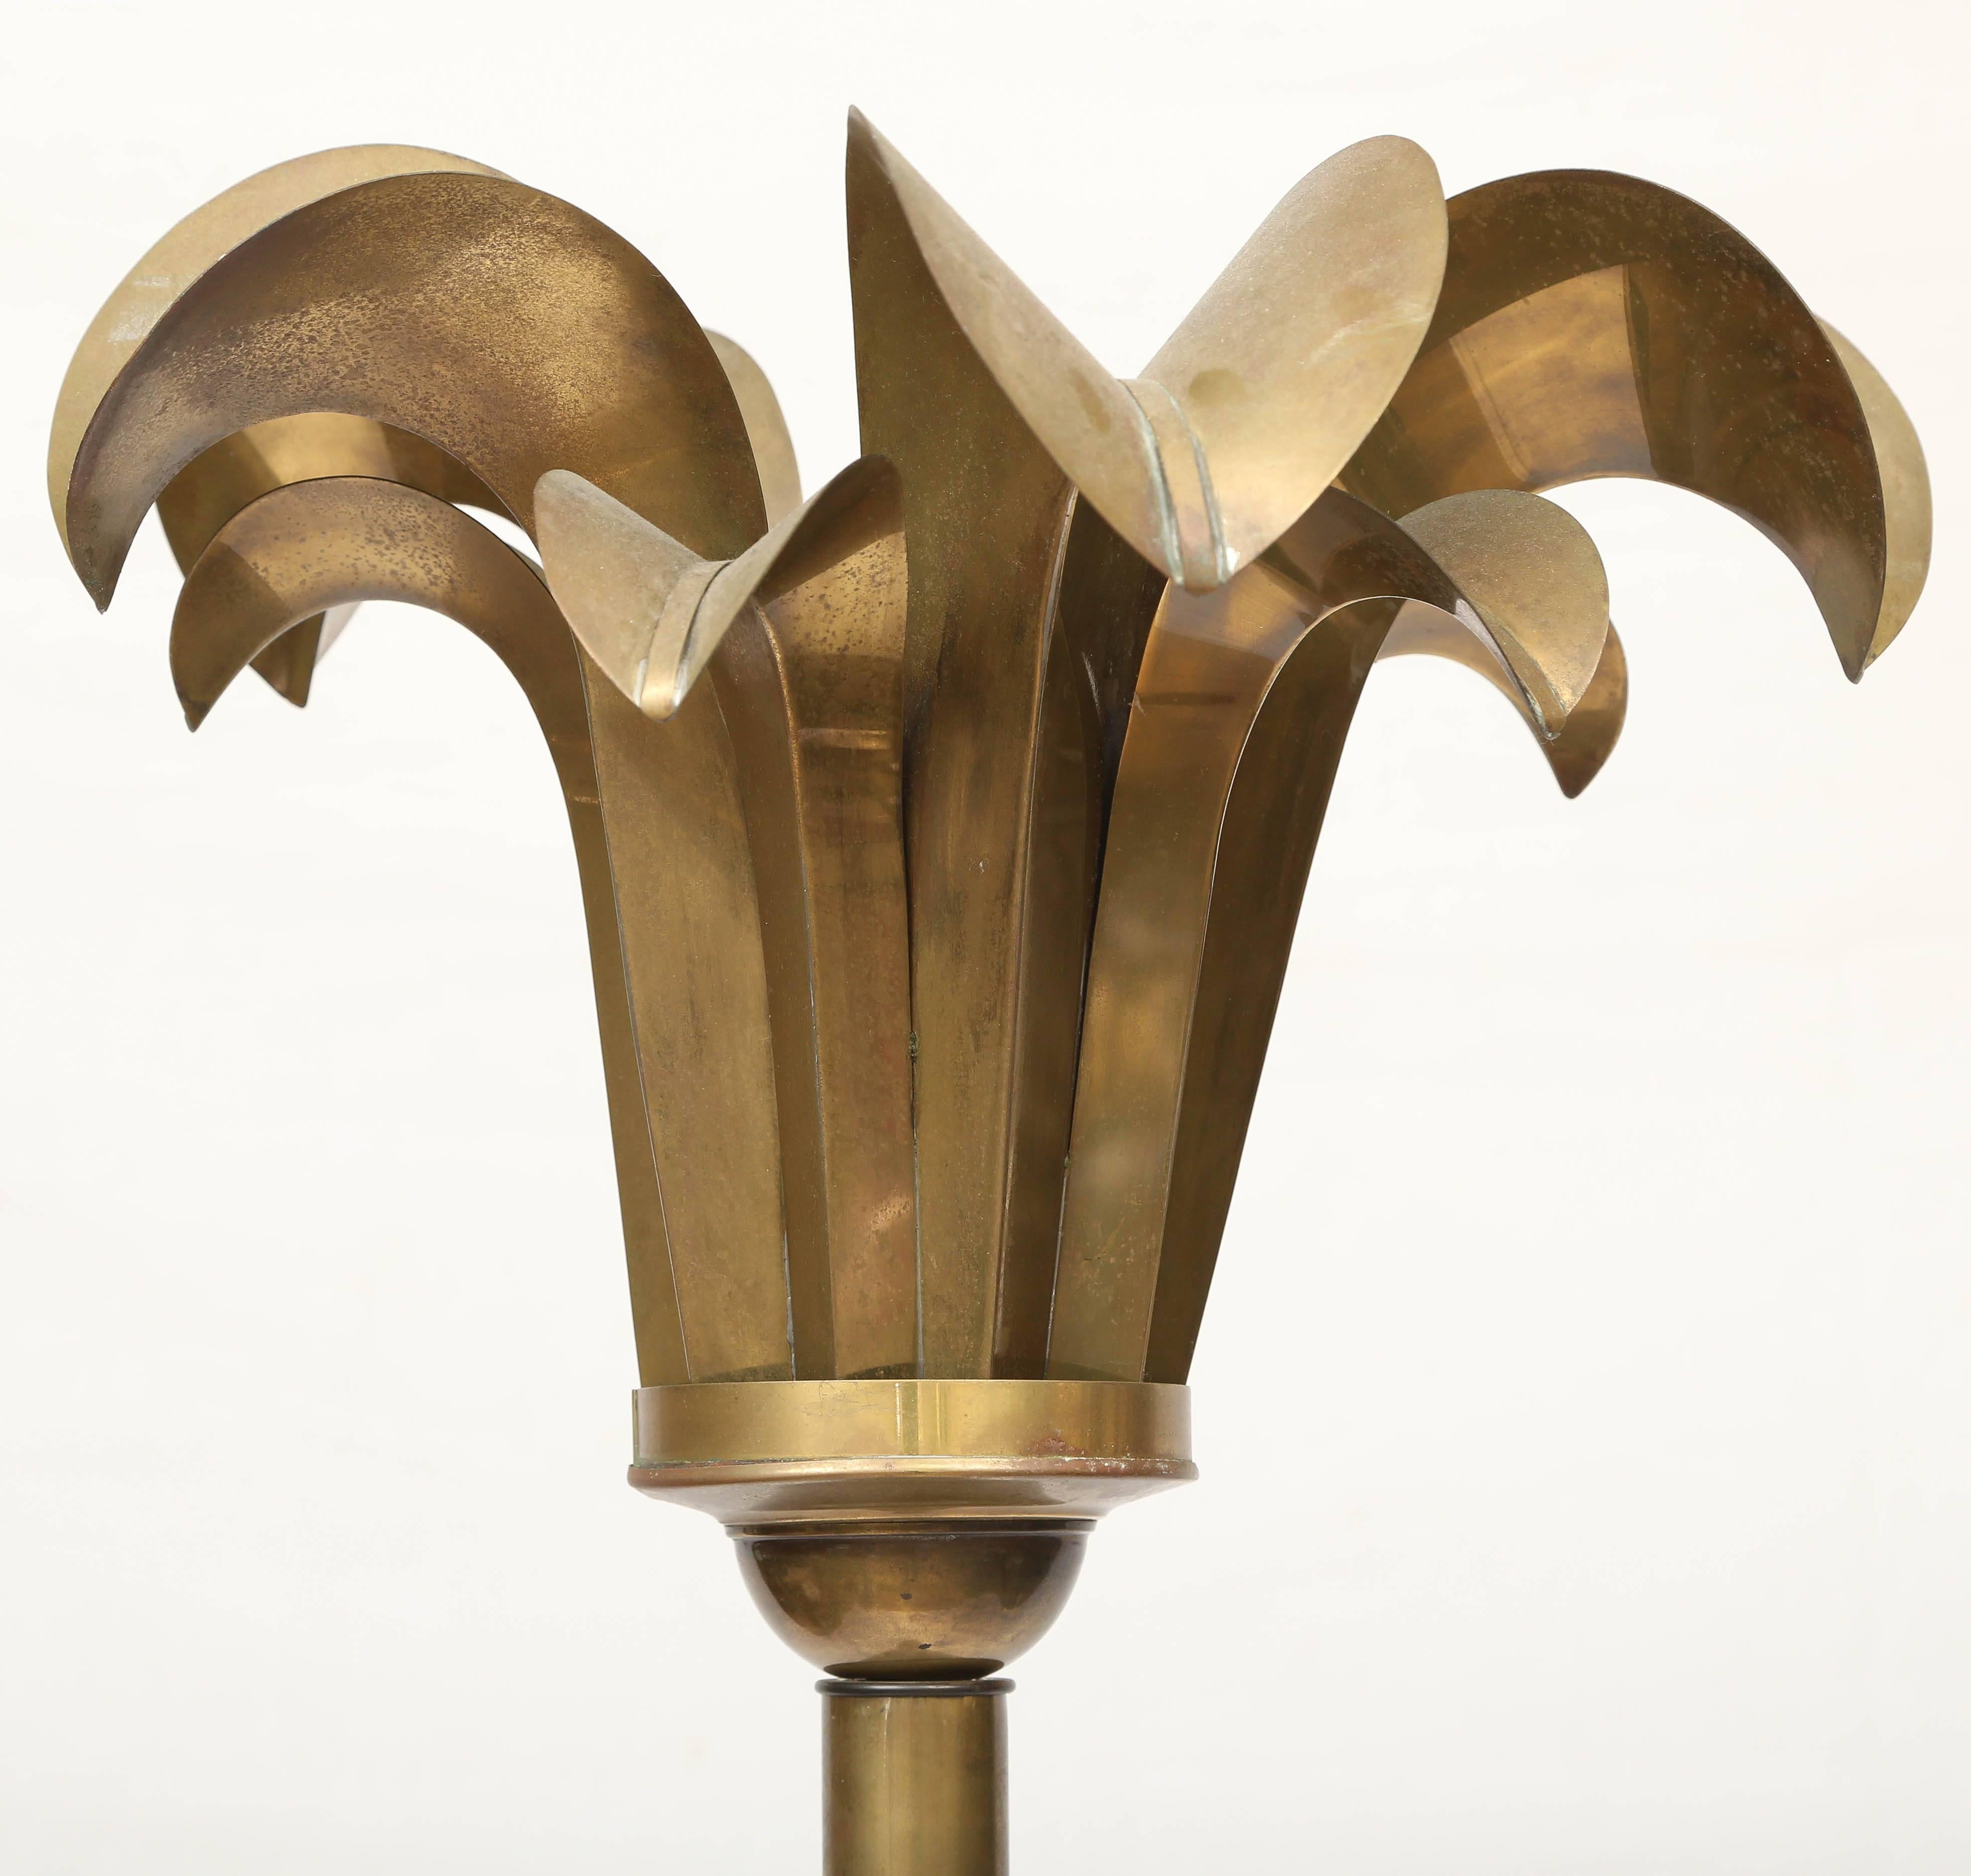 Pair of Art Deco floor lamps in brass. Heavy patina. Torchiere in palm leaf motif fitting for Miami where they were used in a lounge at the Miami International airport during the days before the Jet set.